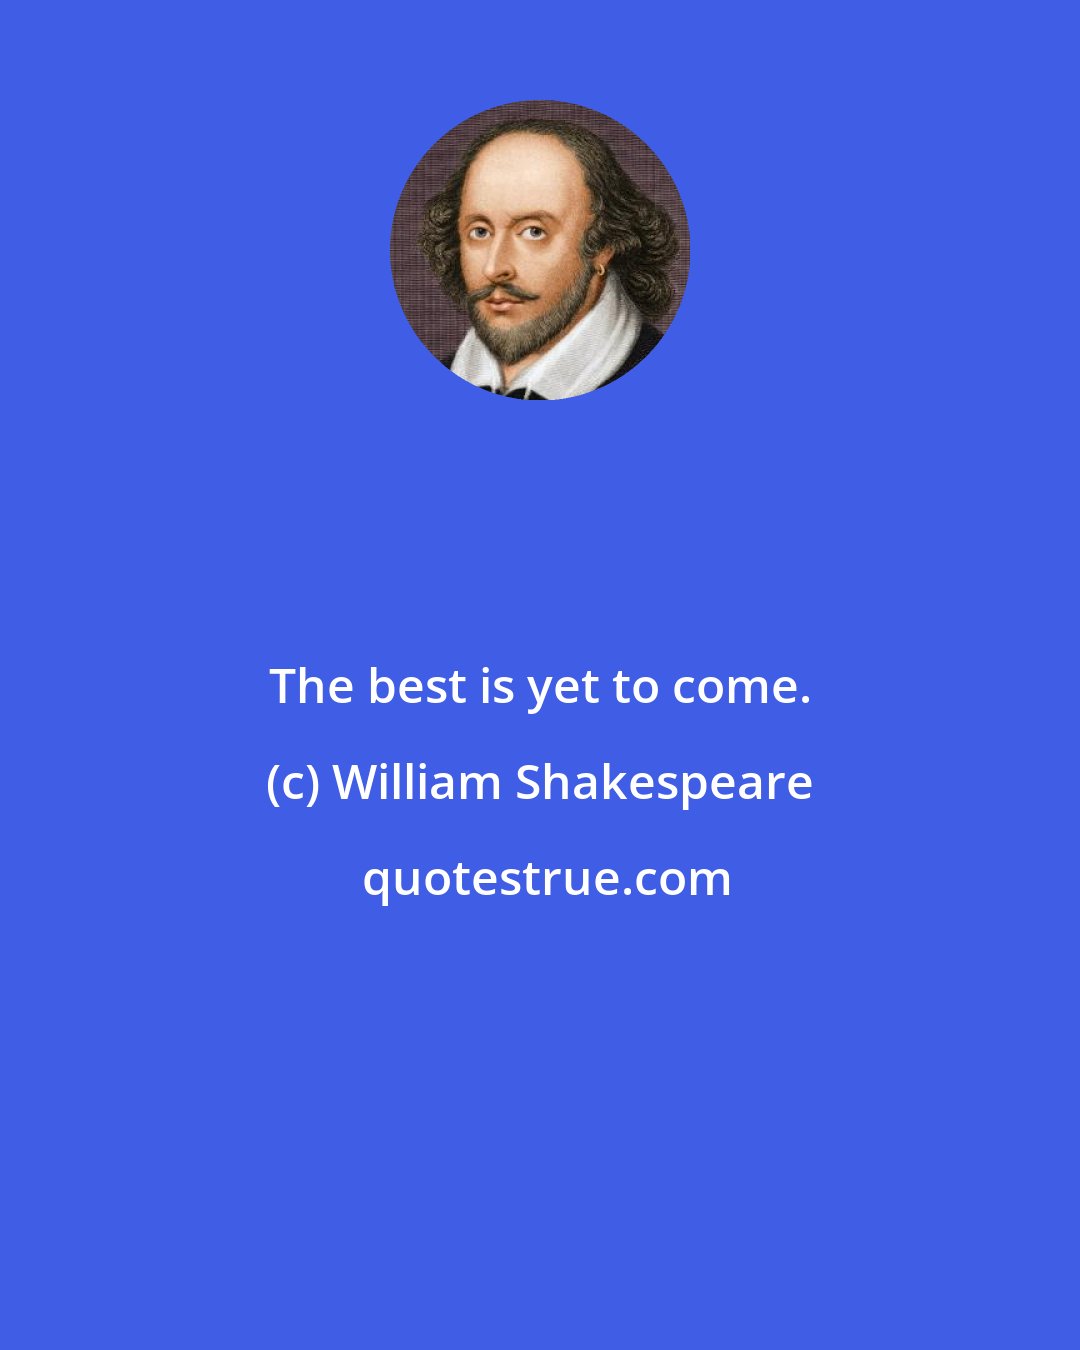 William Shakespeare: The best is yet to come.